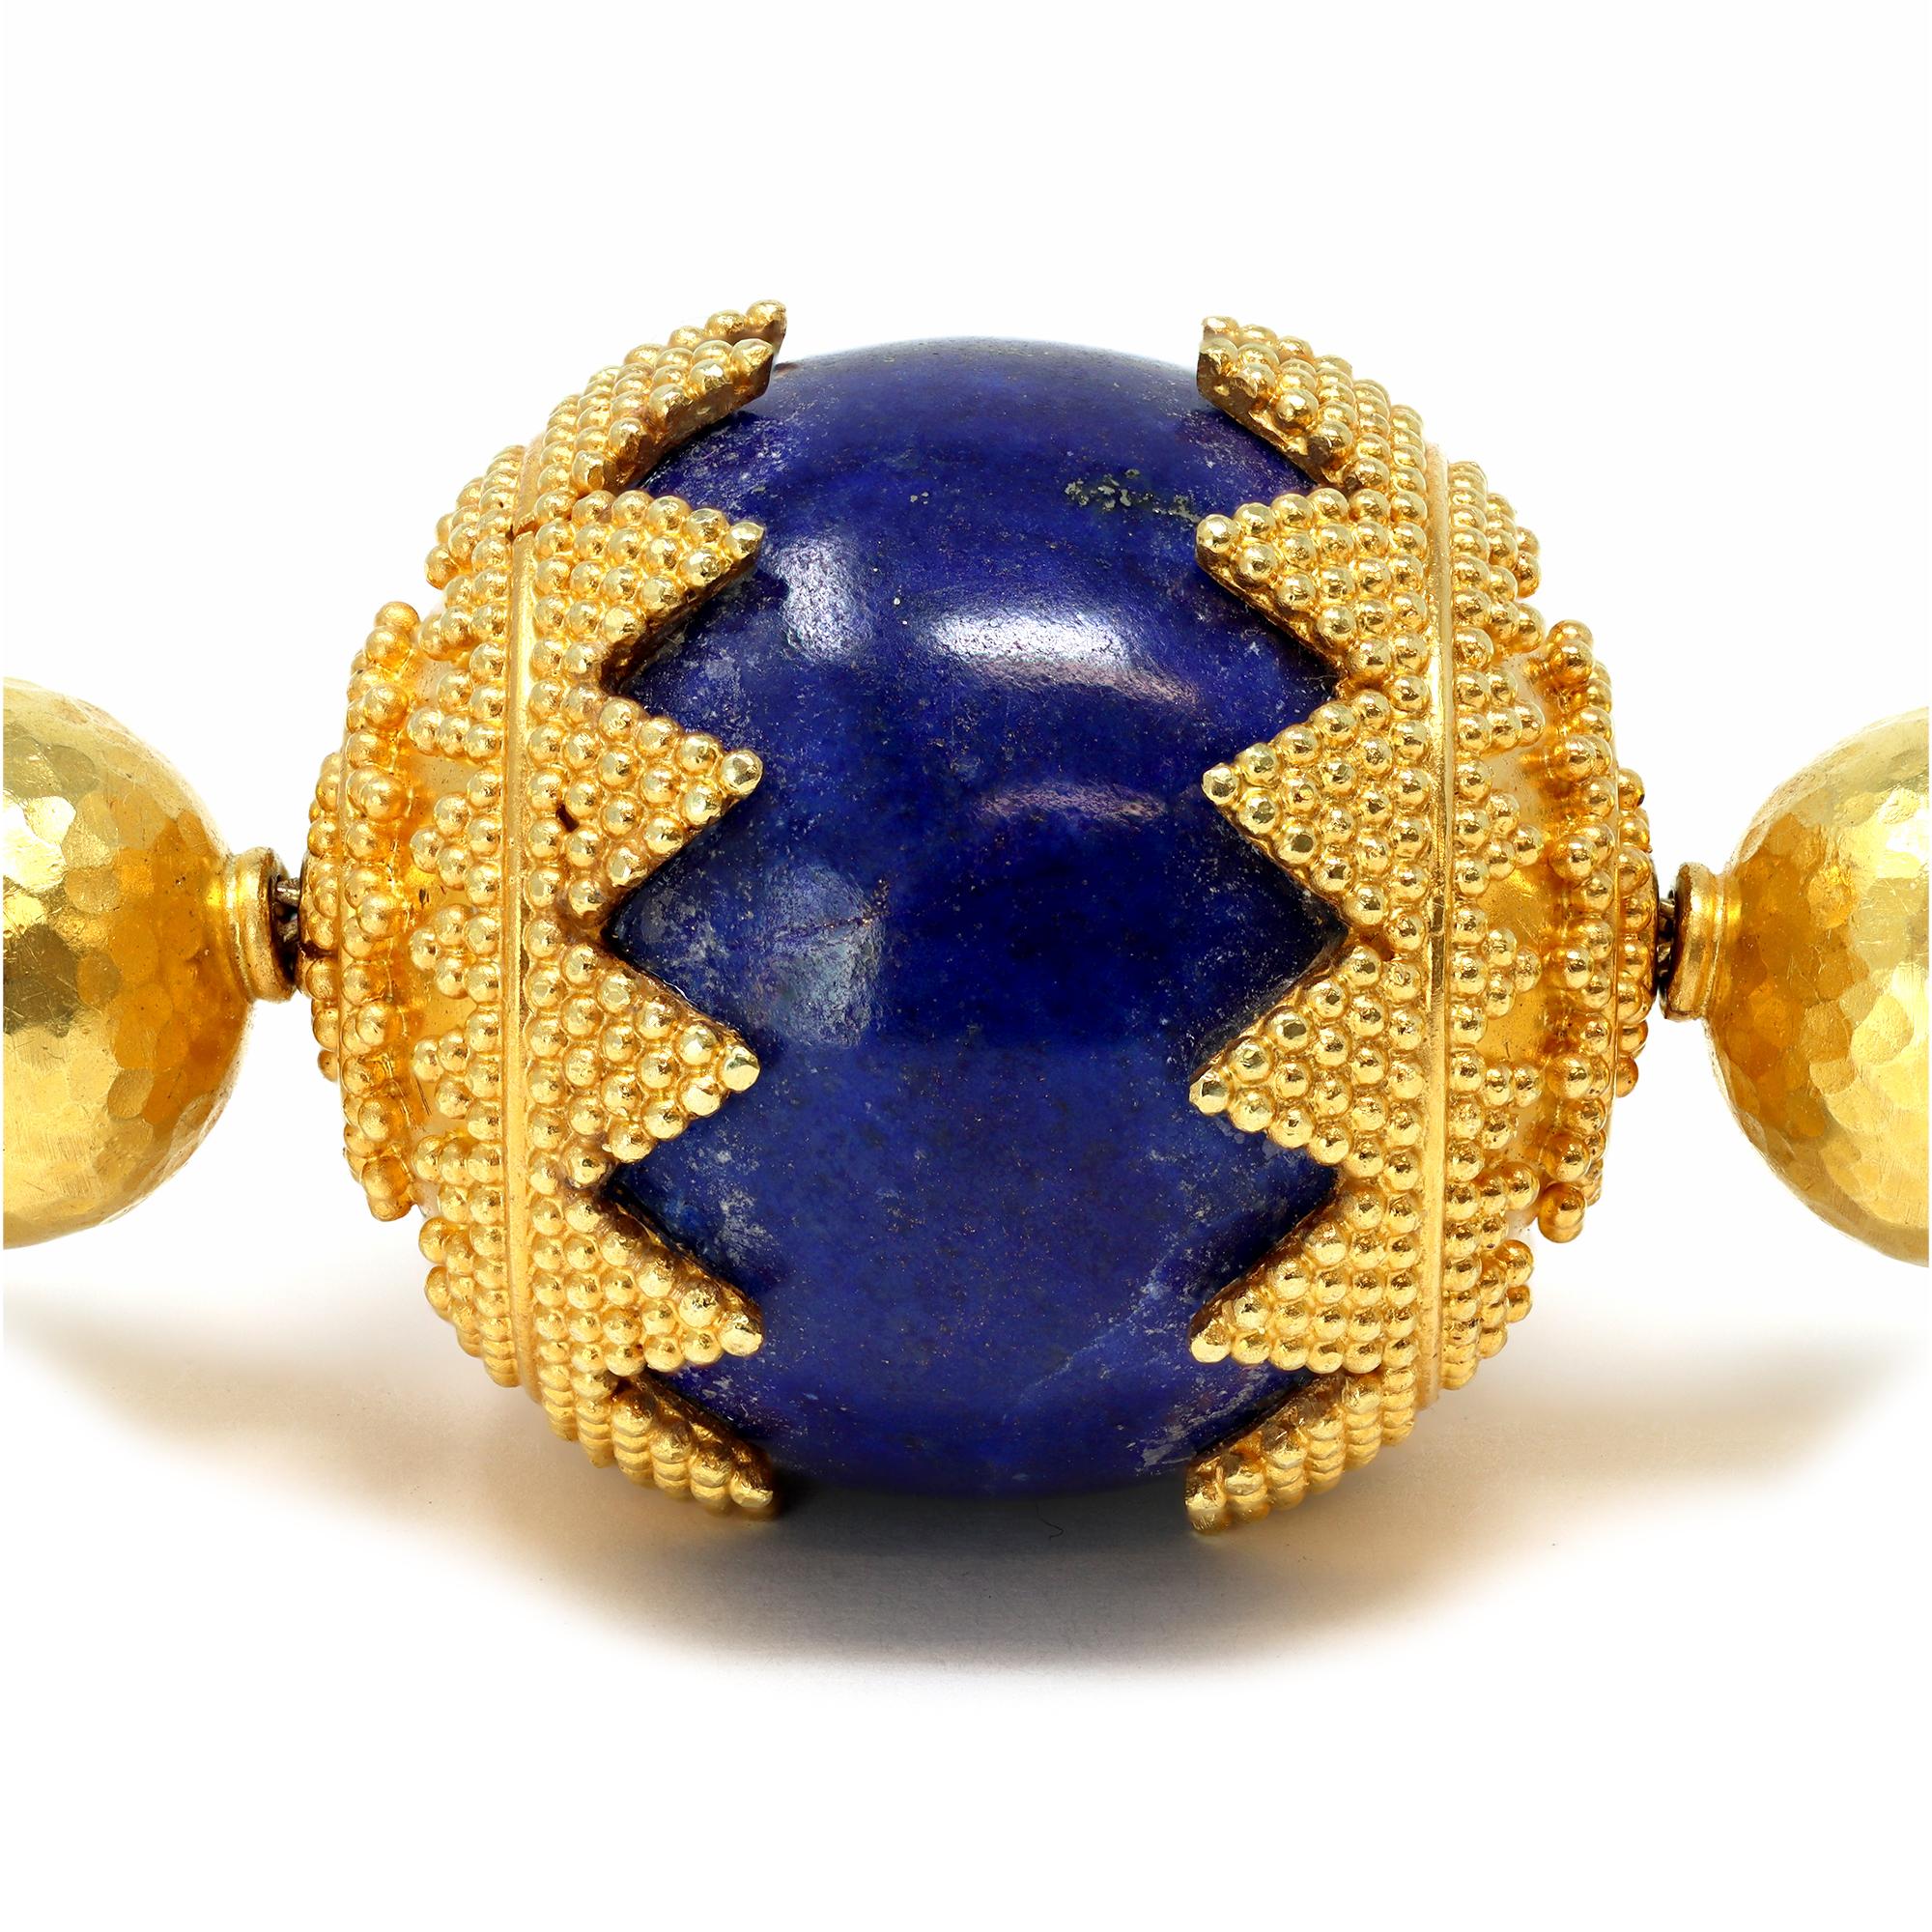 High Karat Gold Necklace with Lapis Lazuli Beads CA 1970 For Sale 2